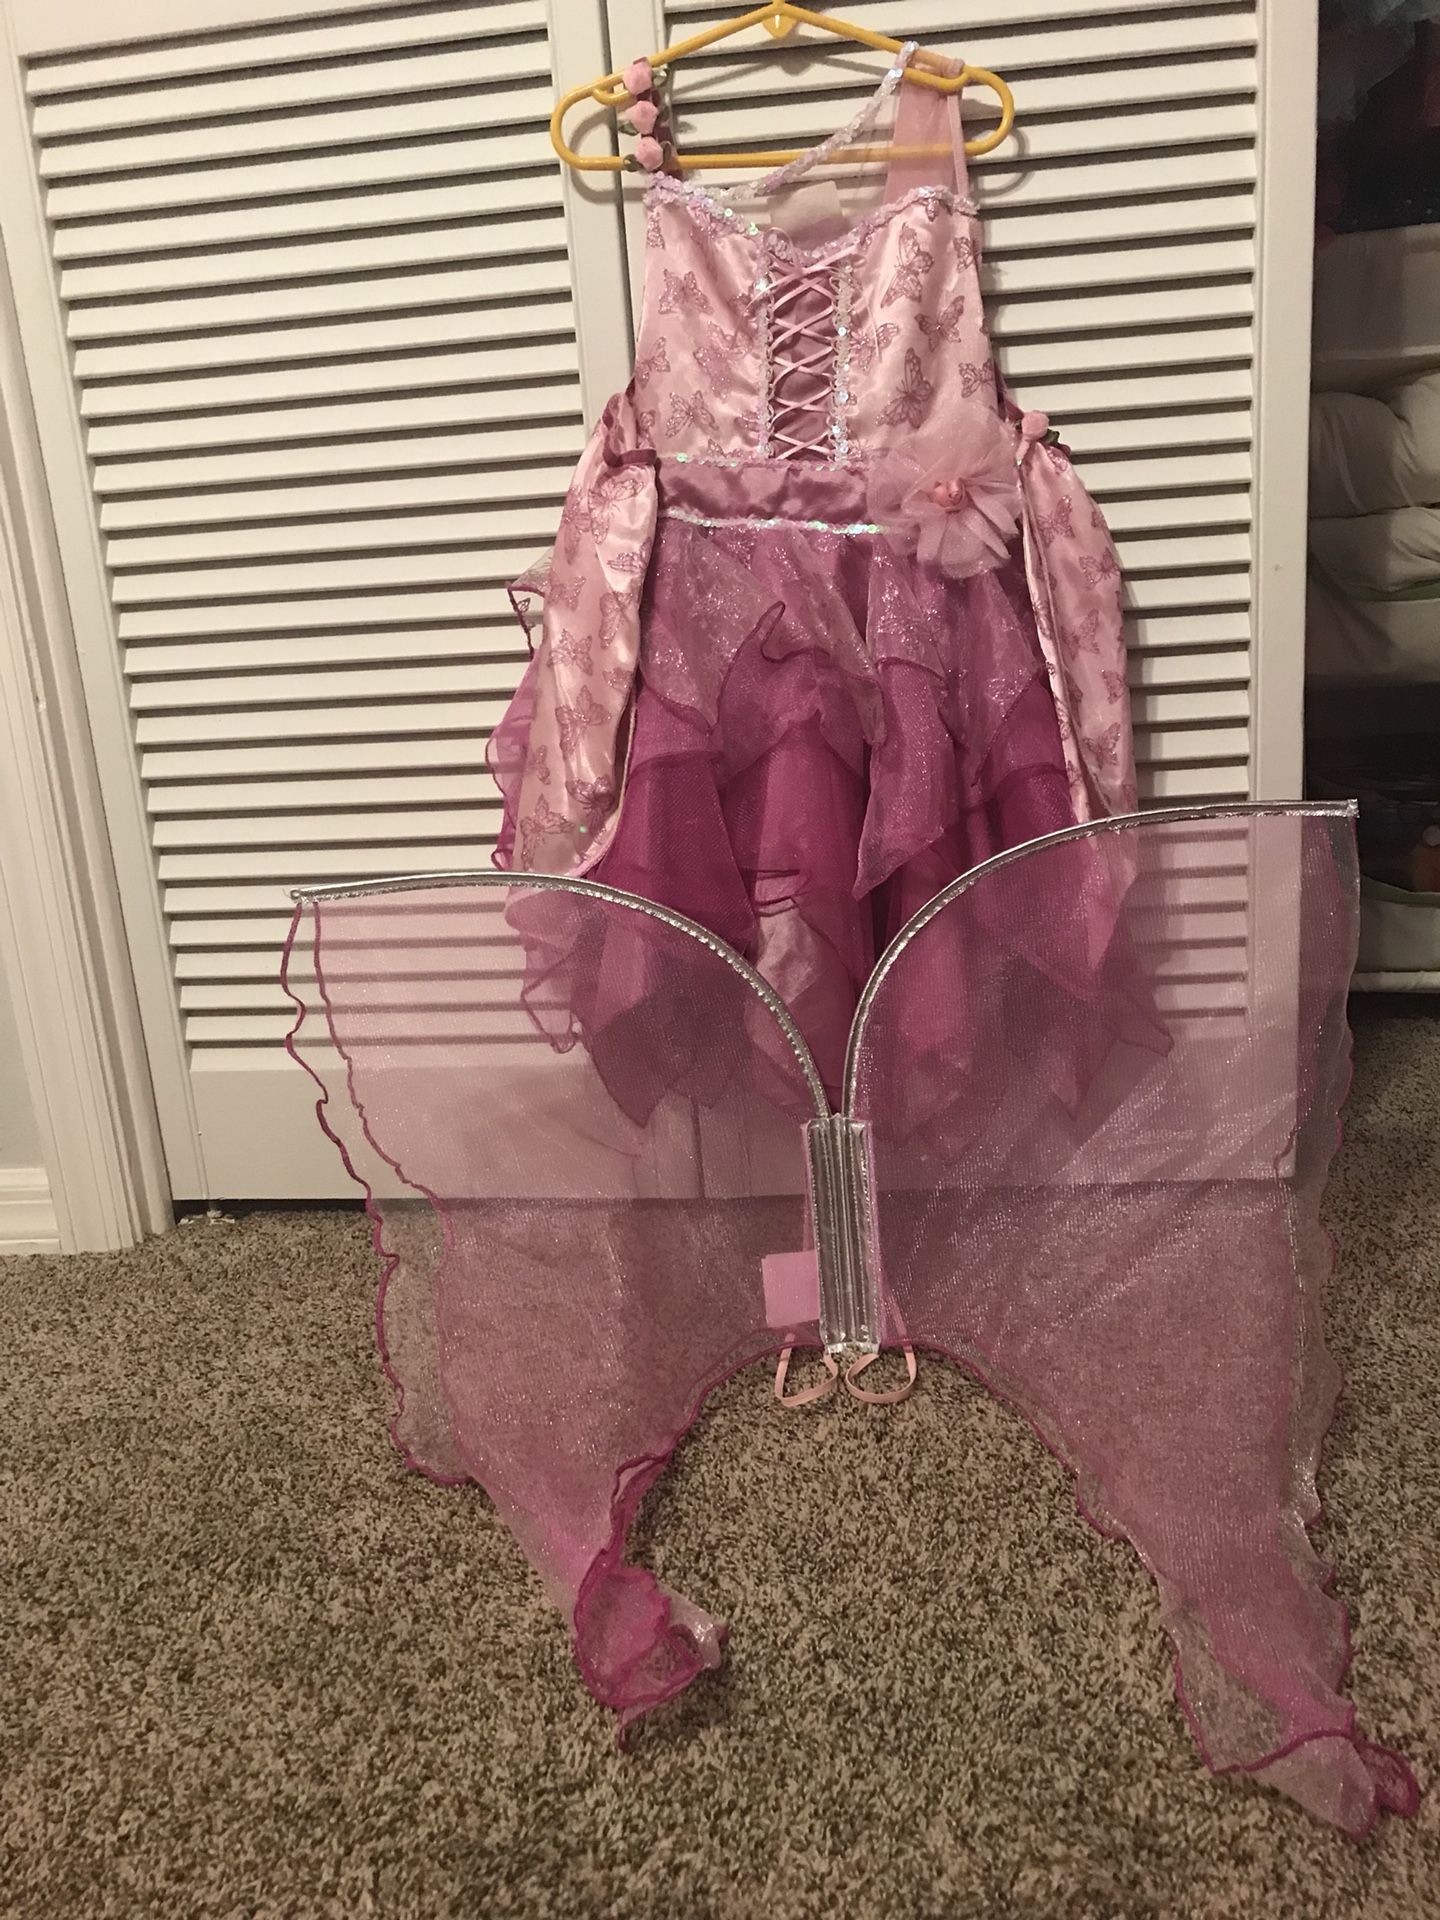 Fairy costume with wings